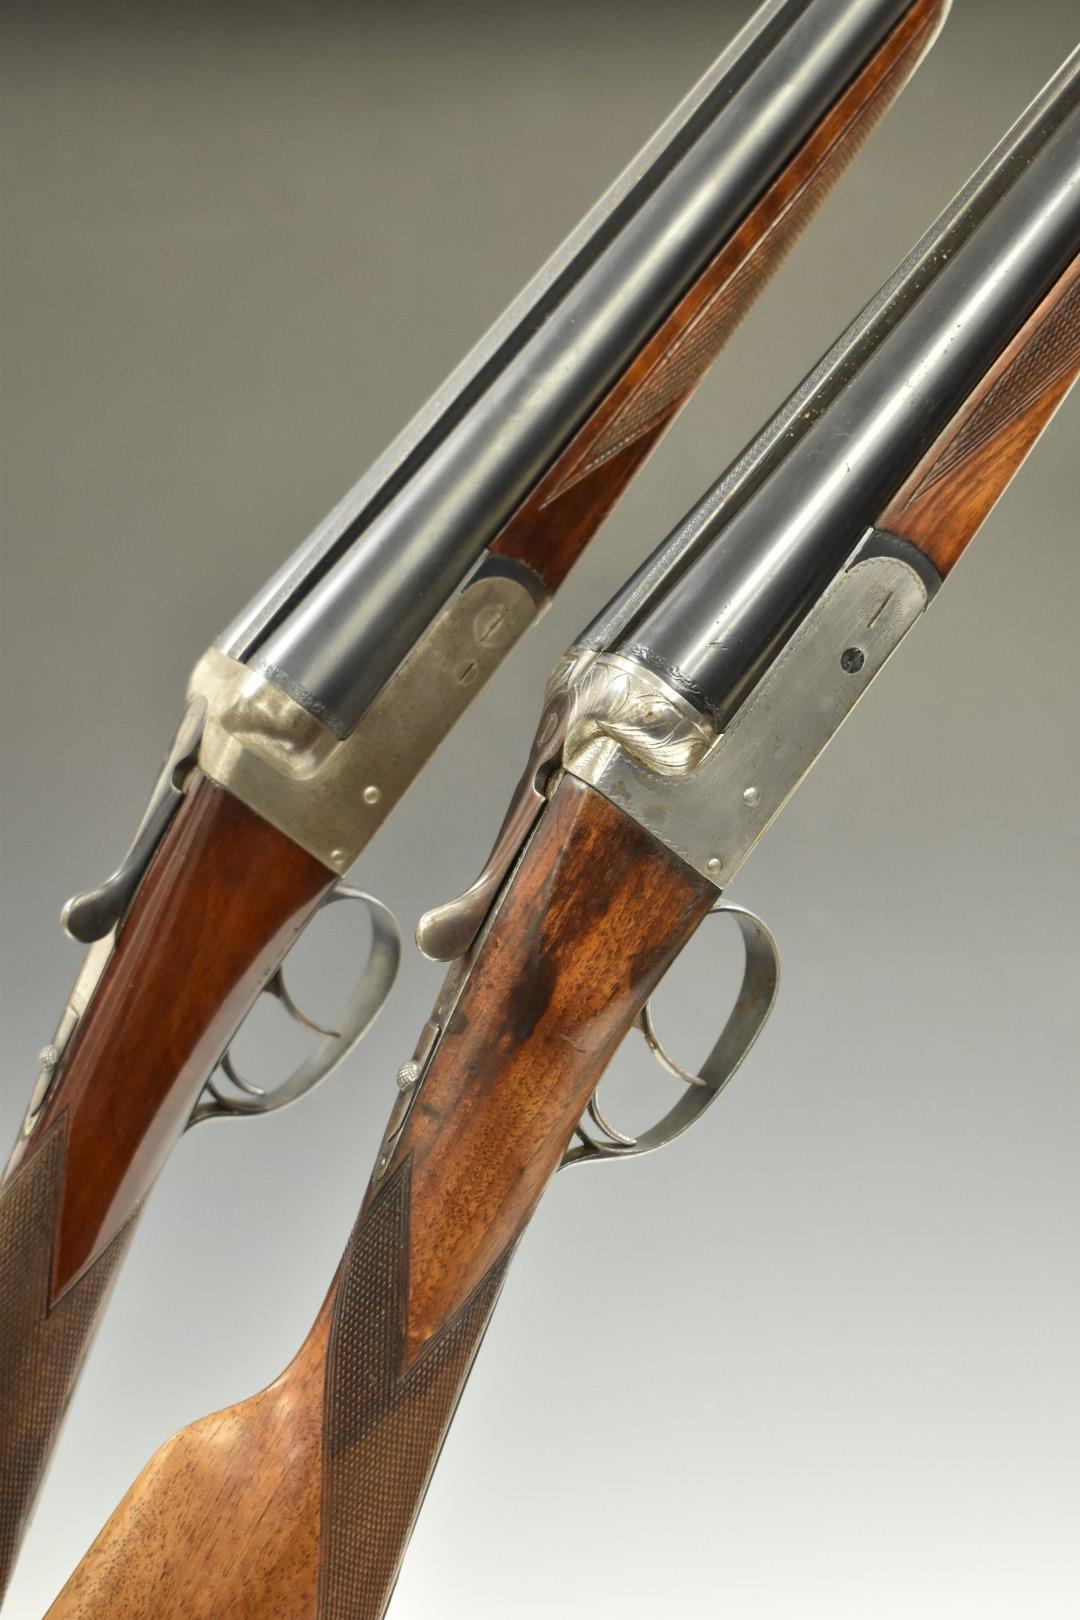 Two Spanish 12 bore side by side shotguns, one Master with chequered grip and forend, double trigger